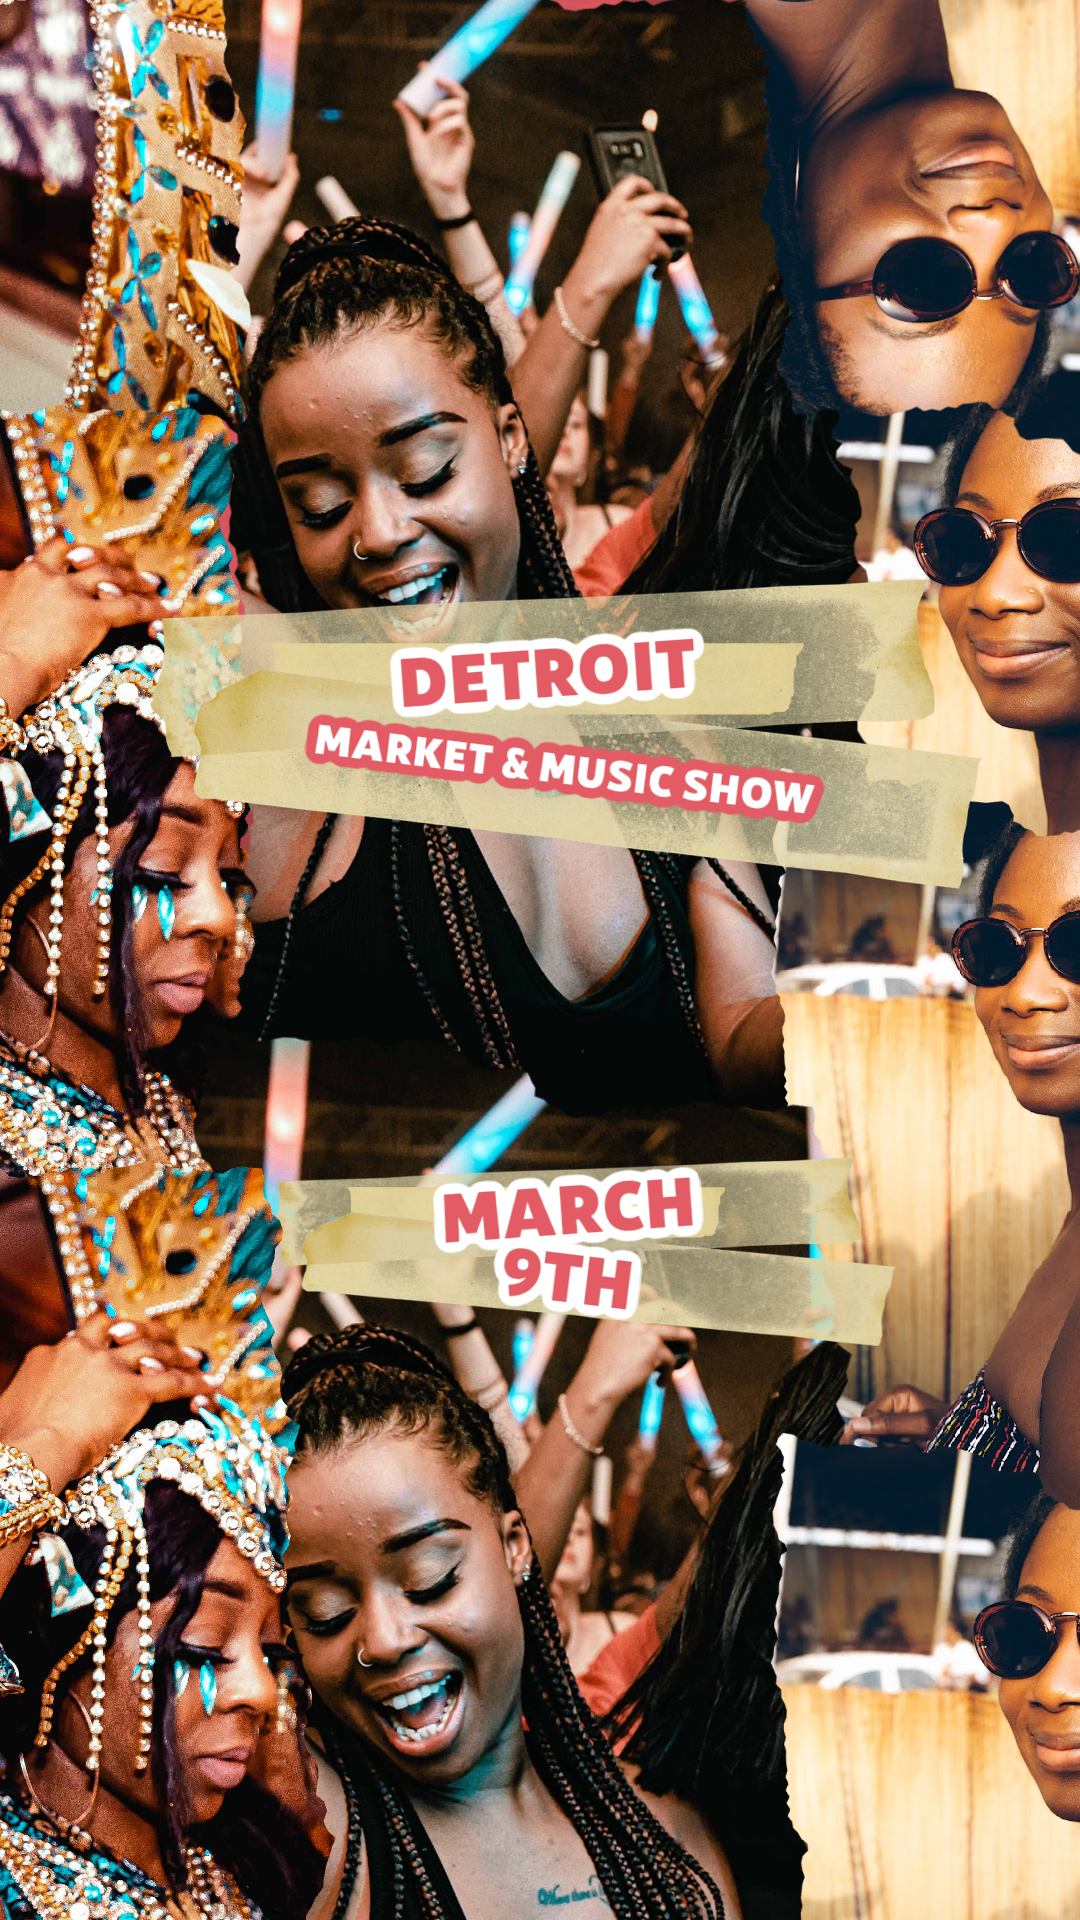 AfroSocaLove : Detroit Party & BlackOwned Market (Feat Maga Stories & More) - Afro Soca Love Supply